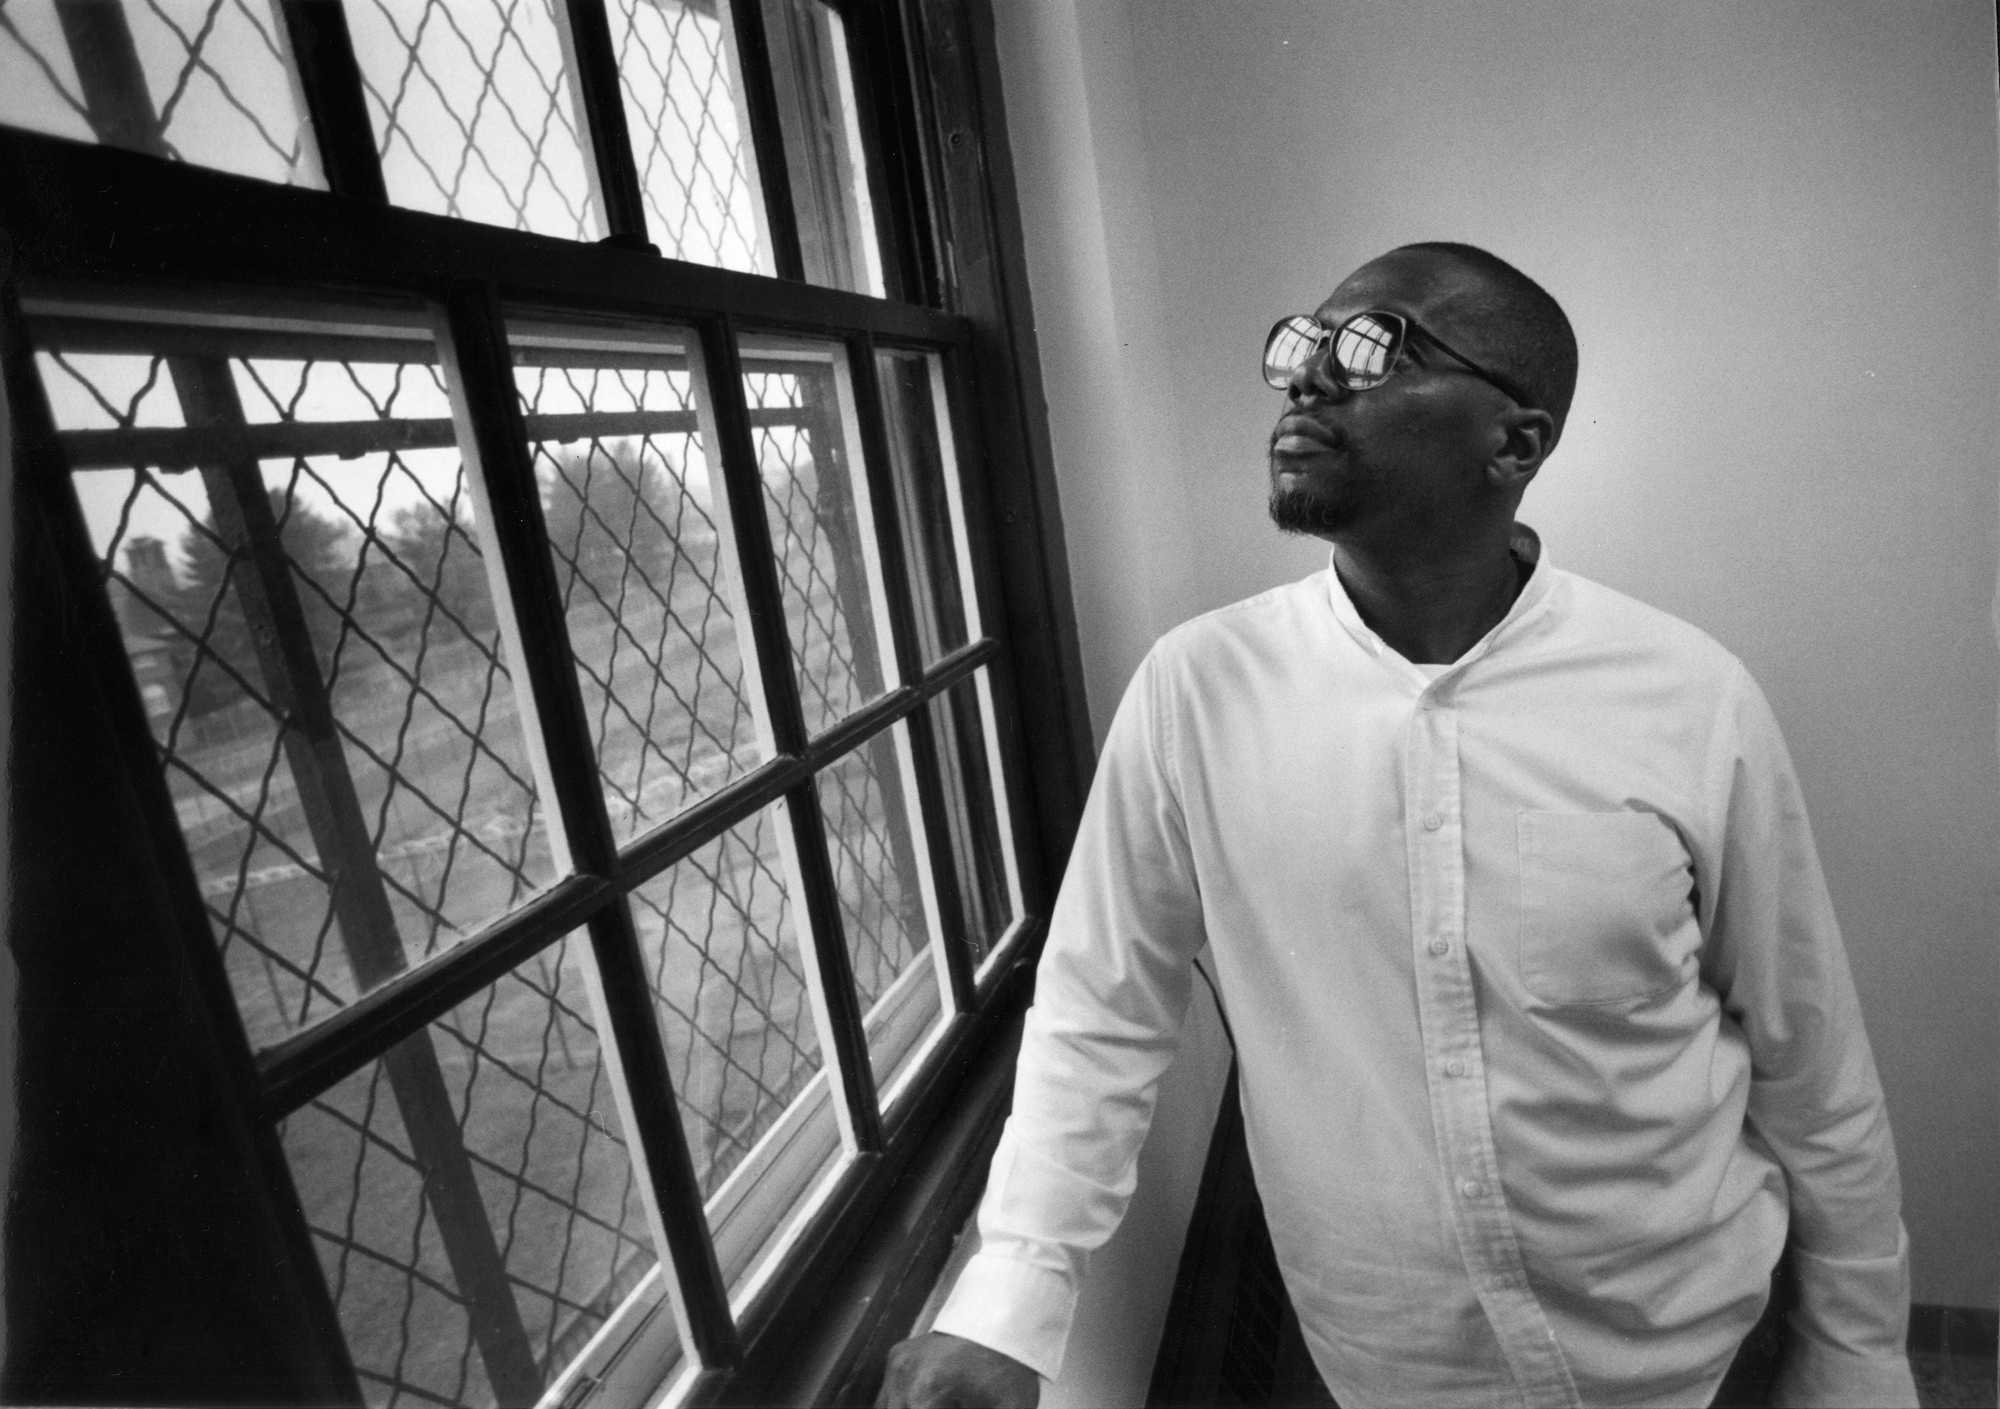 William "Willie" Bennett, during an interview at the state prison in Gardner on Nov. 24, 1992. Bennett was wrongly linked to the murder of Carol Stuart before evidence emerged that her husband, Chuck, had masterminded the crime.